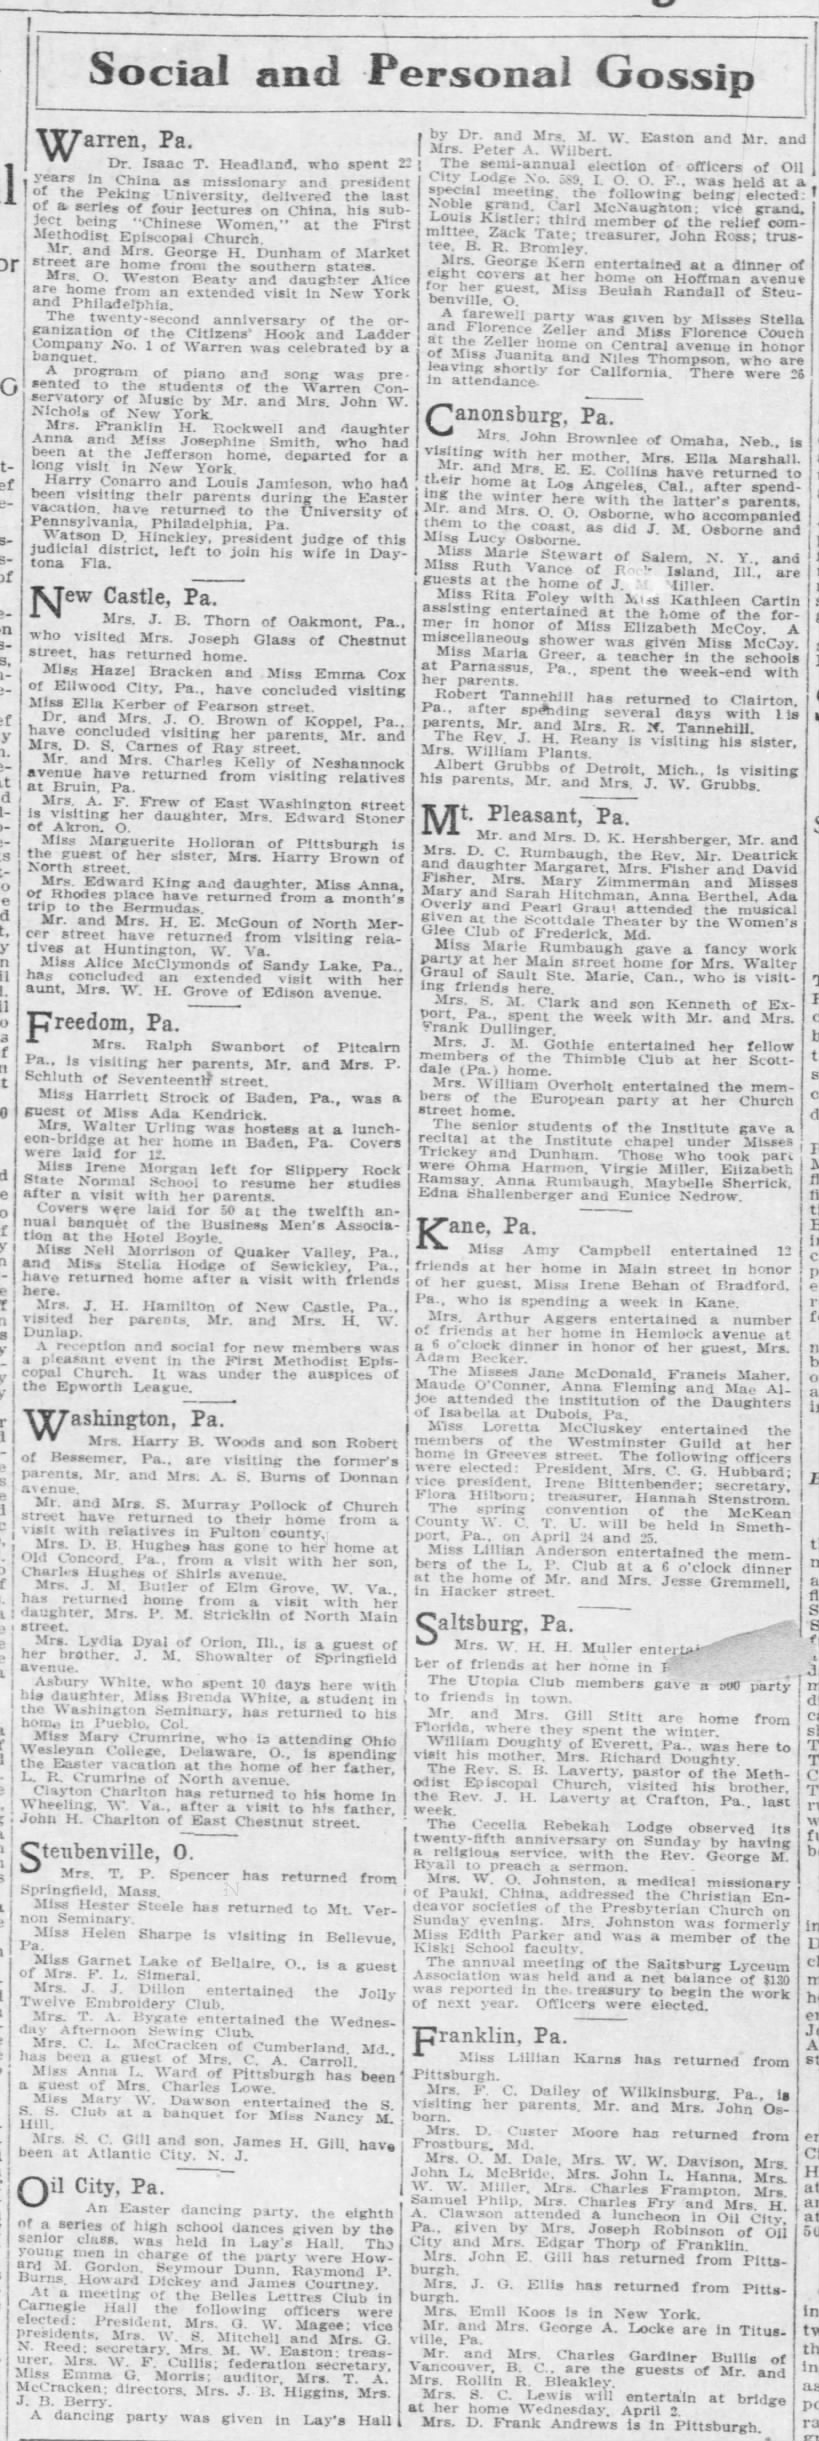 Social and Personal Gossip column in the Pittsburgh Gazette Times (Post-Gazette), 1913